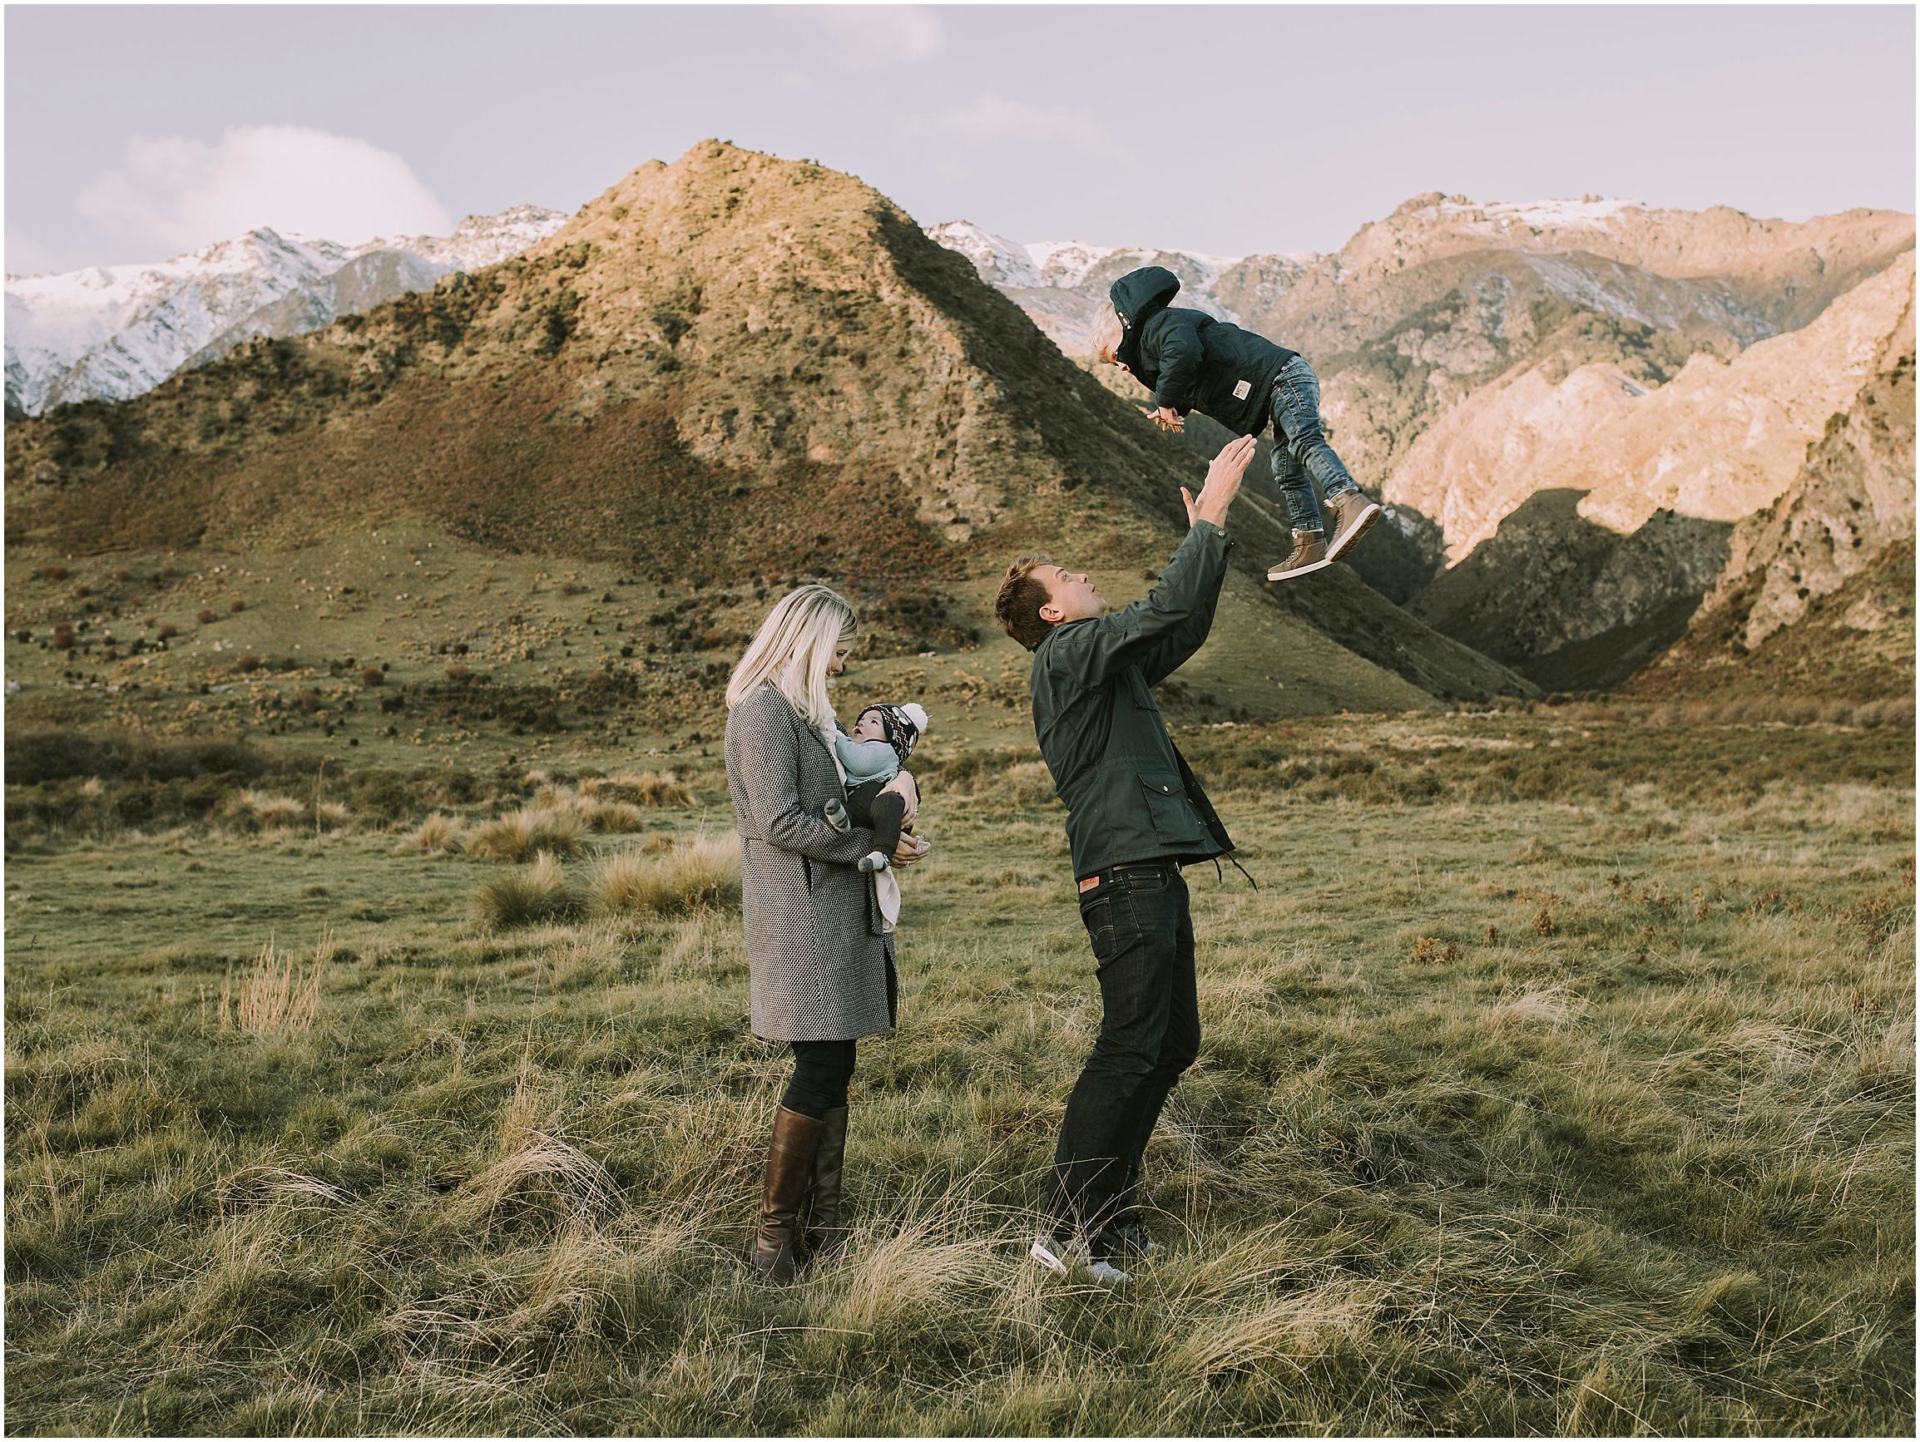 Charlotte Kiri Photography - Family Photography of a father throwing his toddler up in the air, as the mother holds her newborn baby in a field in front of mountains in Wanaka, New Zealand.